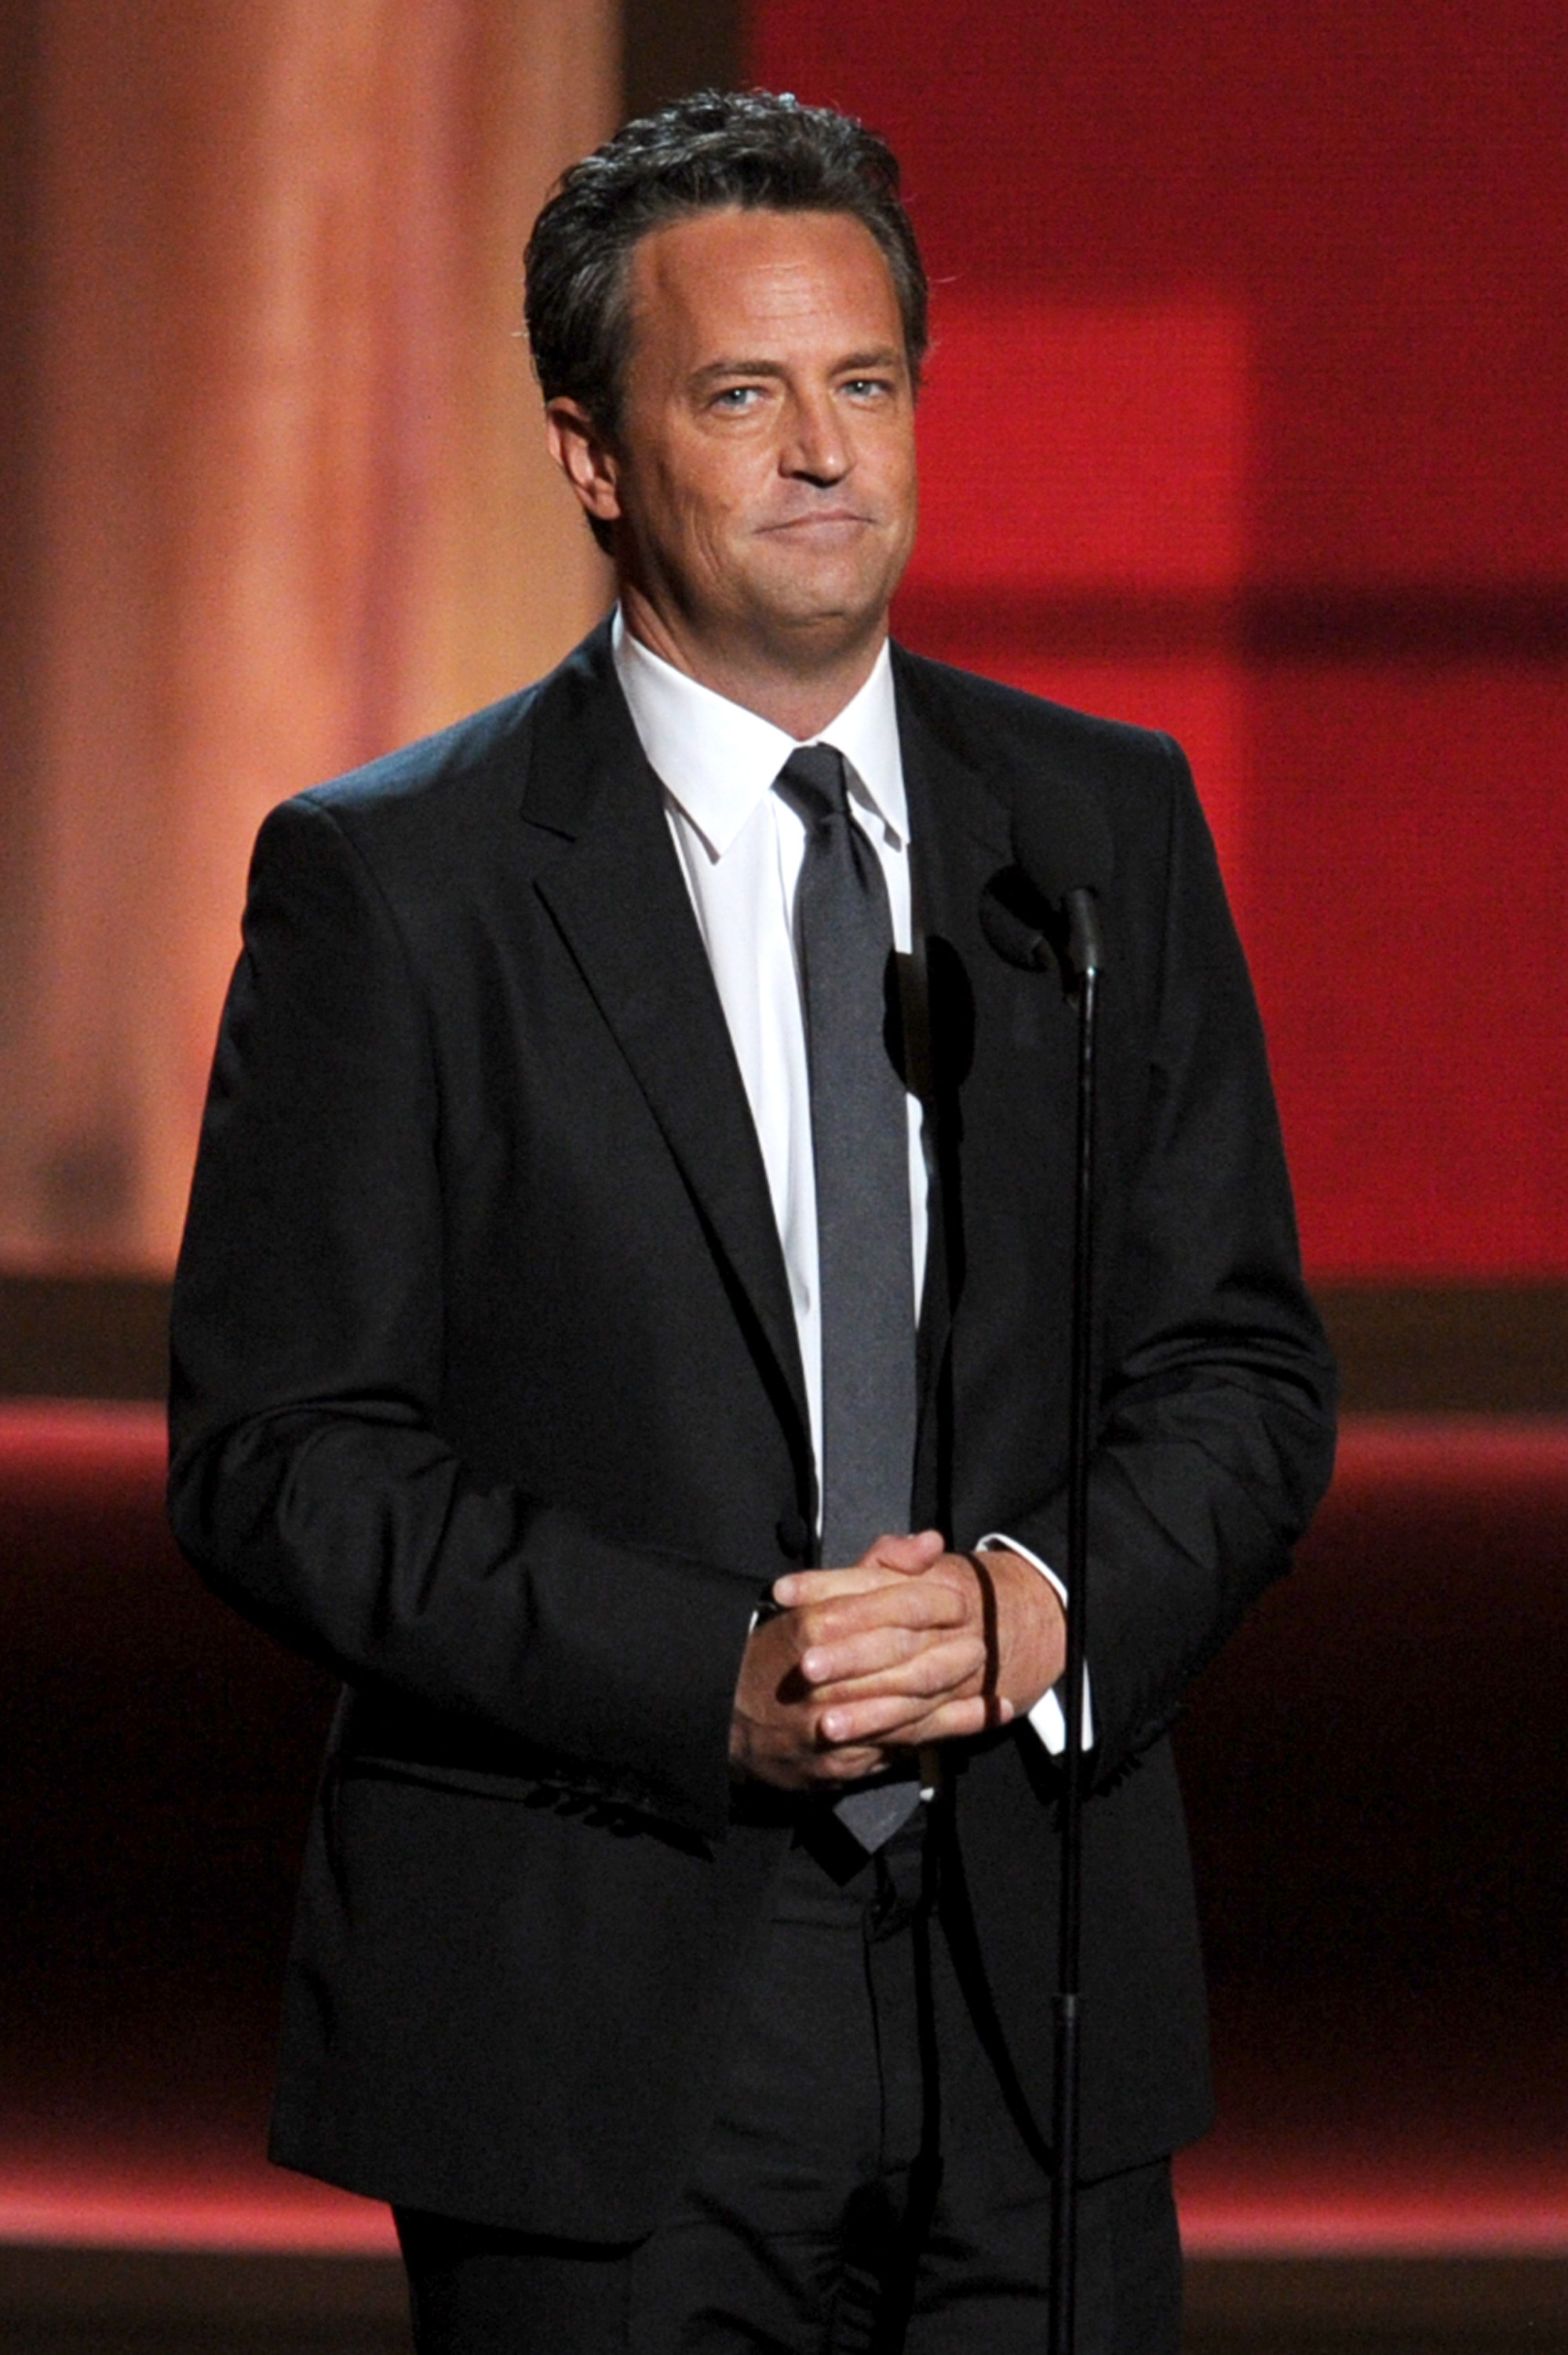 Matthew Perry at the 64th Annual Primetime Emmy Awards in Los Angeles, California, on September 23, 2012. | Source: Getty Images